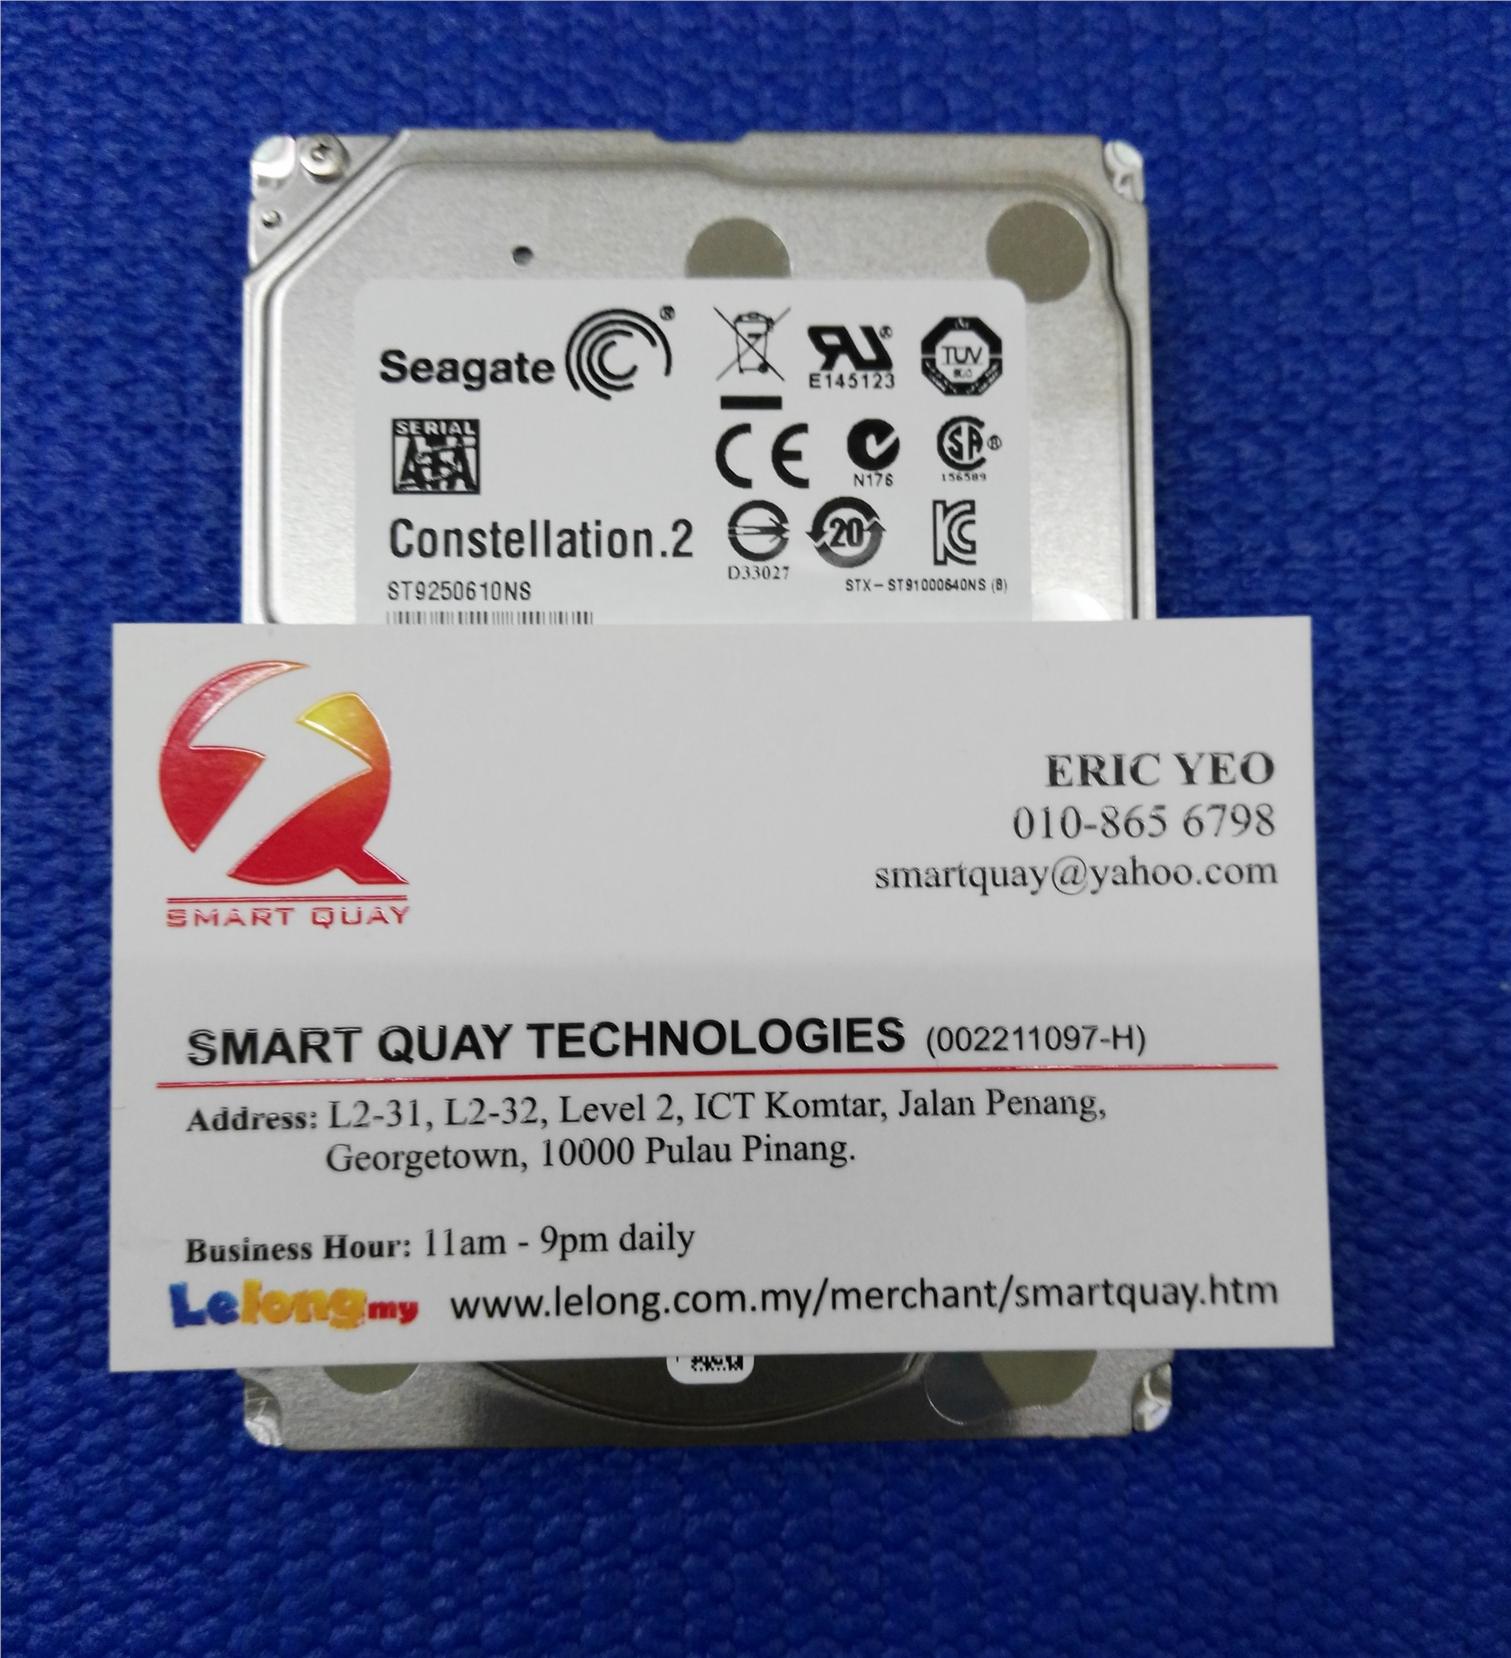 Seagate Constellation 2 ST NS 250GB HDD